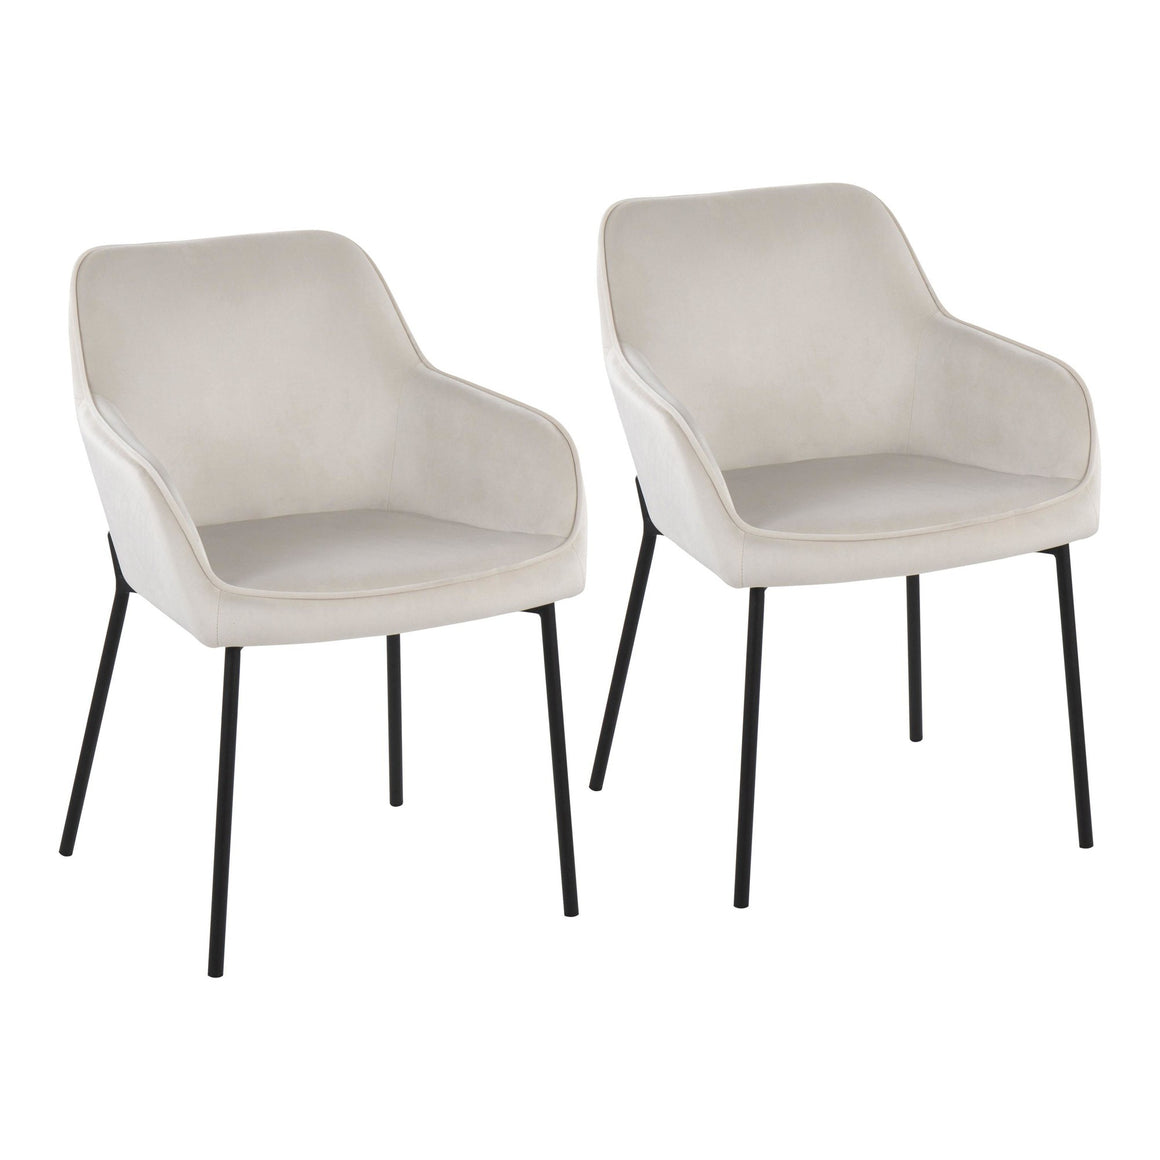 Daniella Contemporary Dining Chair in Black Steel and Cream Velvet by LumiSource - Set of 2